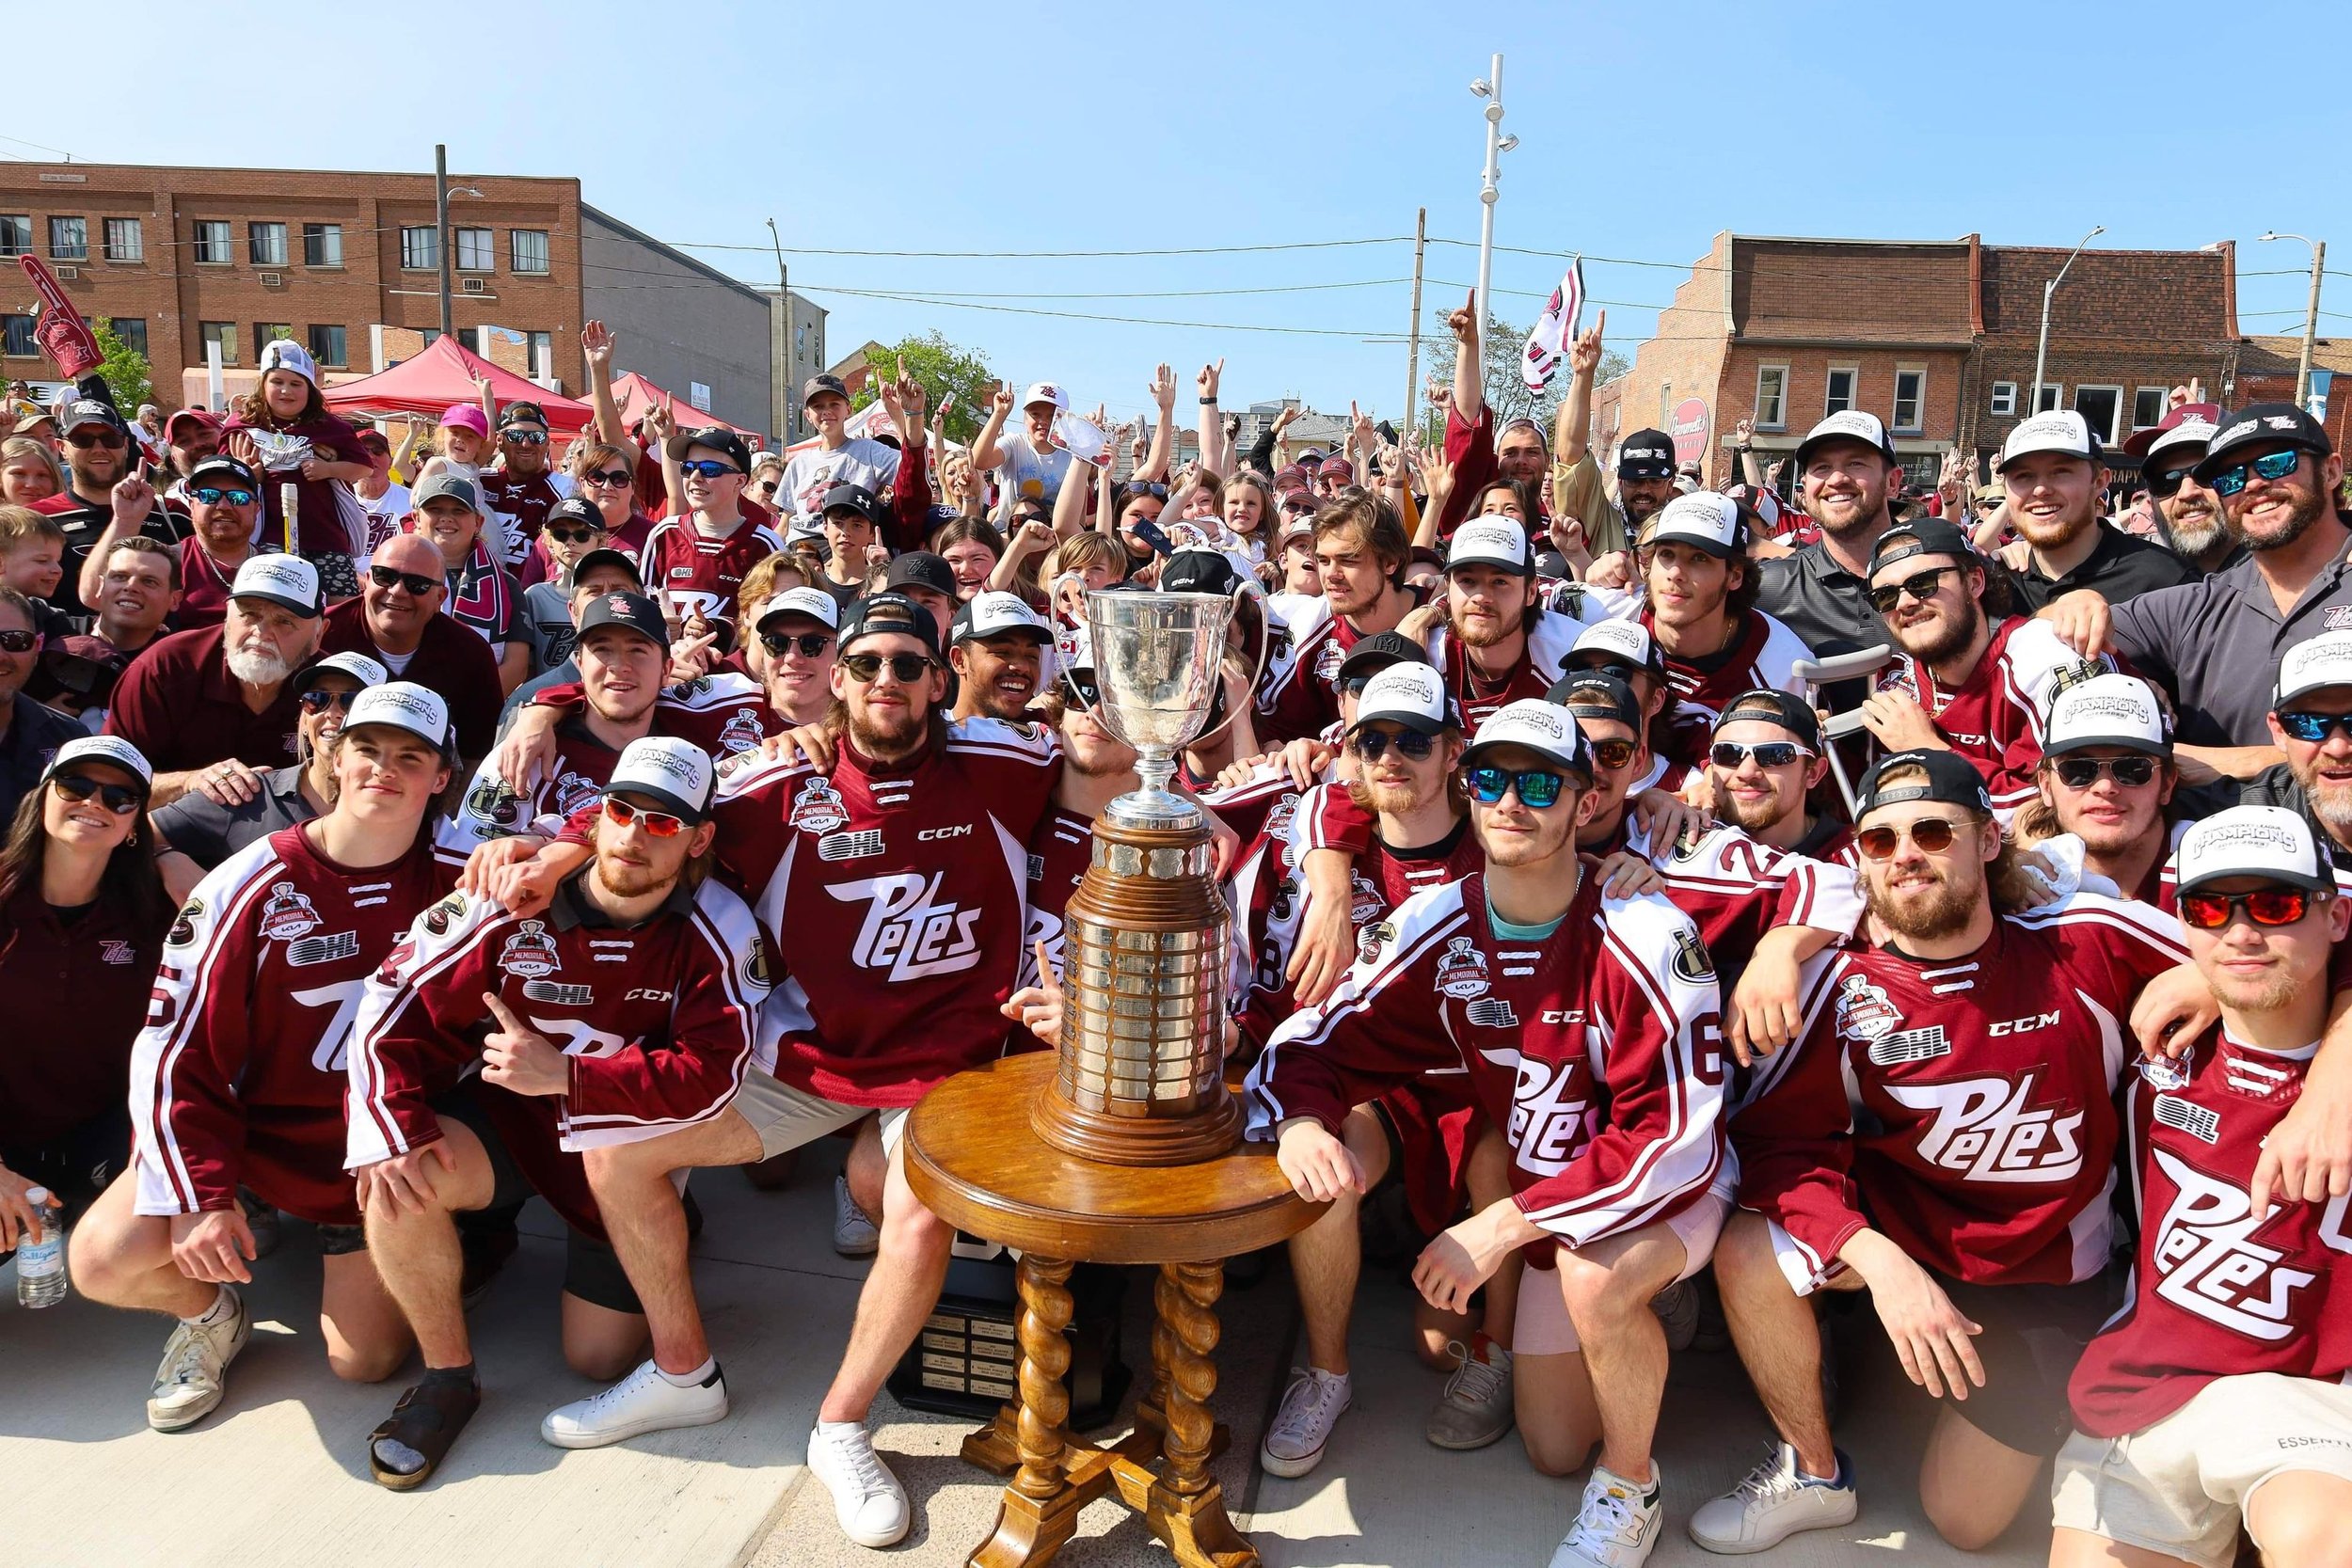 Peterborough Petes 50/50 Tickets On Sale During the Memorial Cup — PtboCanada